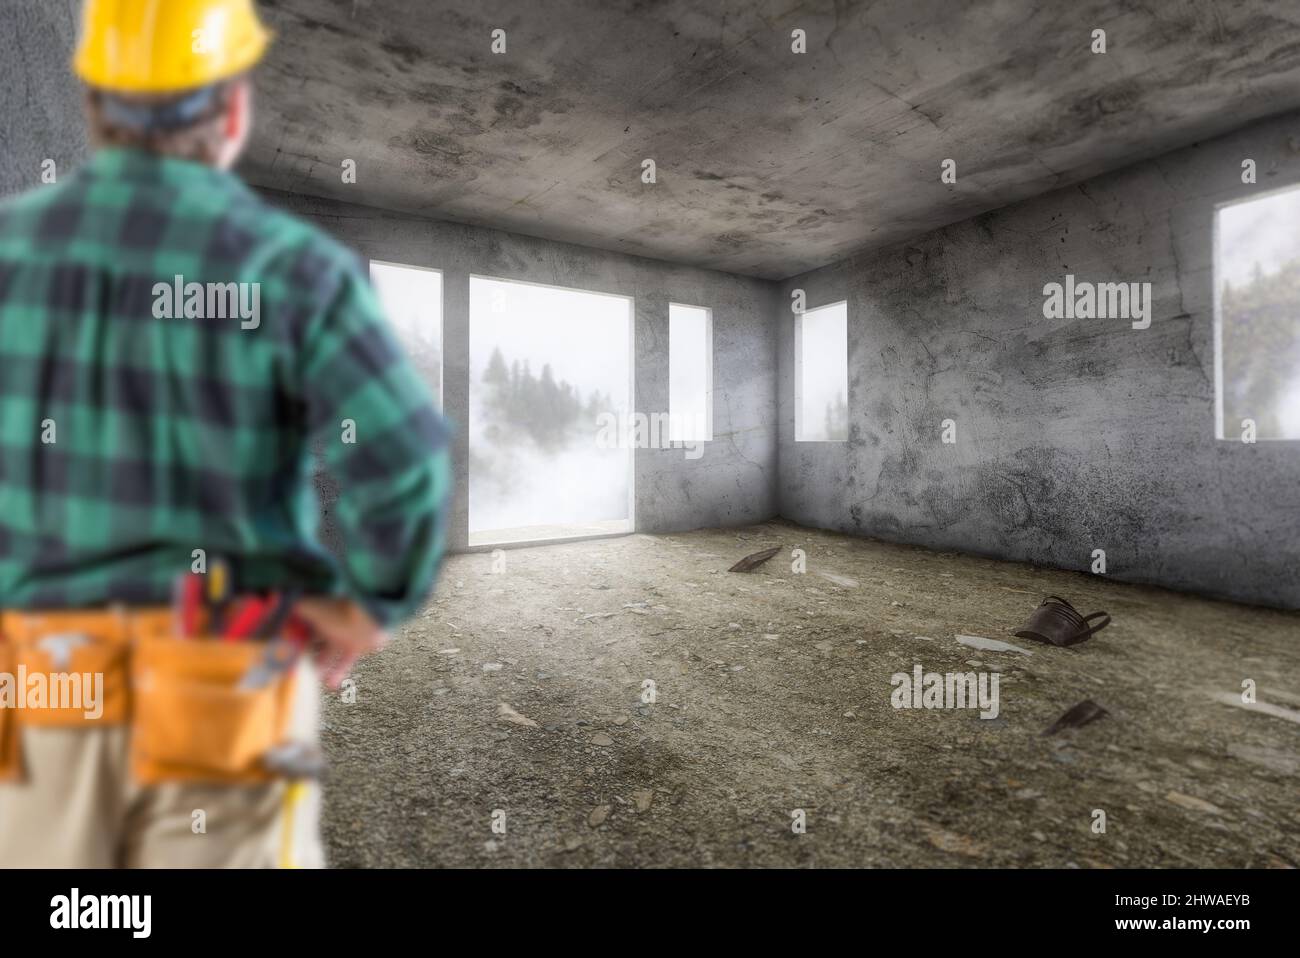 Contractor In Hard Hat and Construction Belt Facing Vacant Empty Abandoned Room of House. Stock Photo